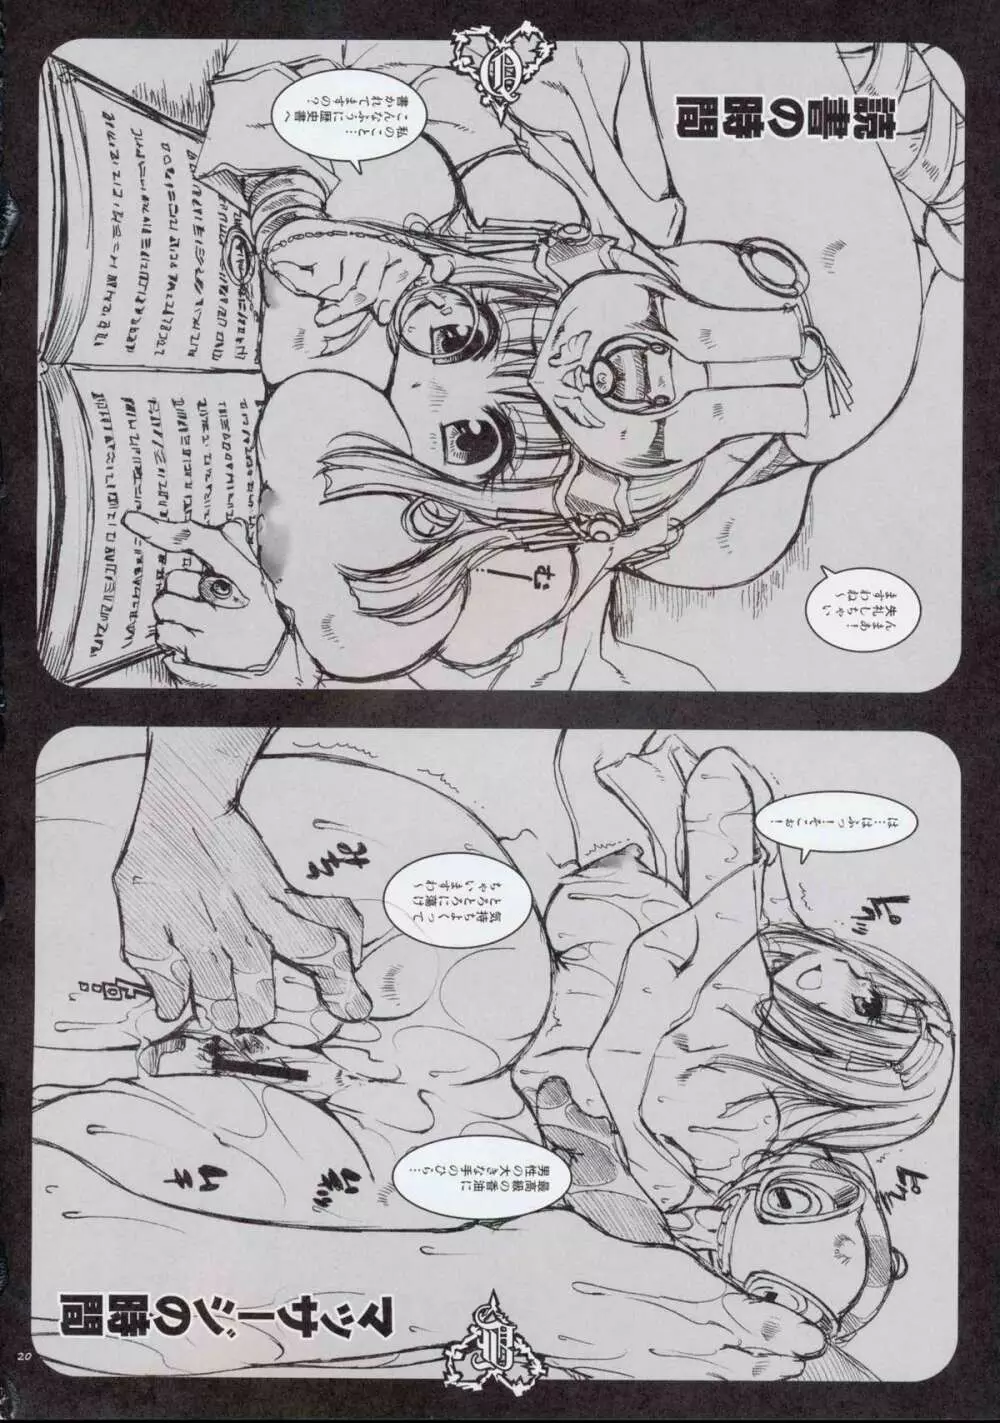 Cat Fight Over Drive - page19